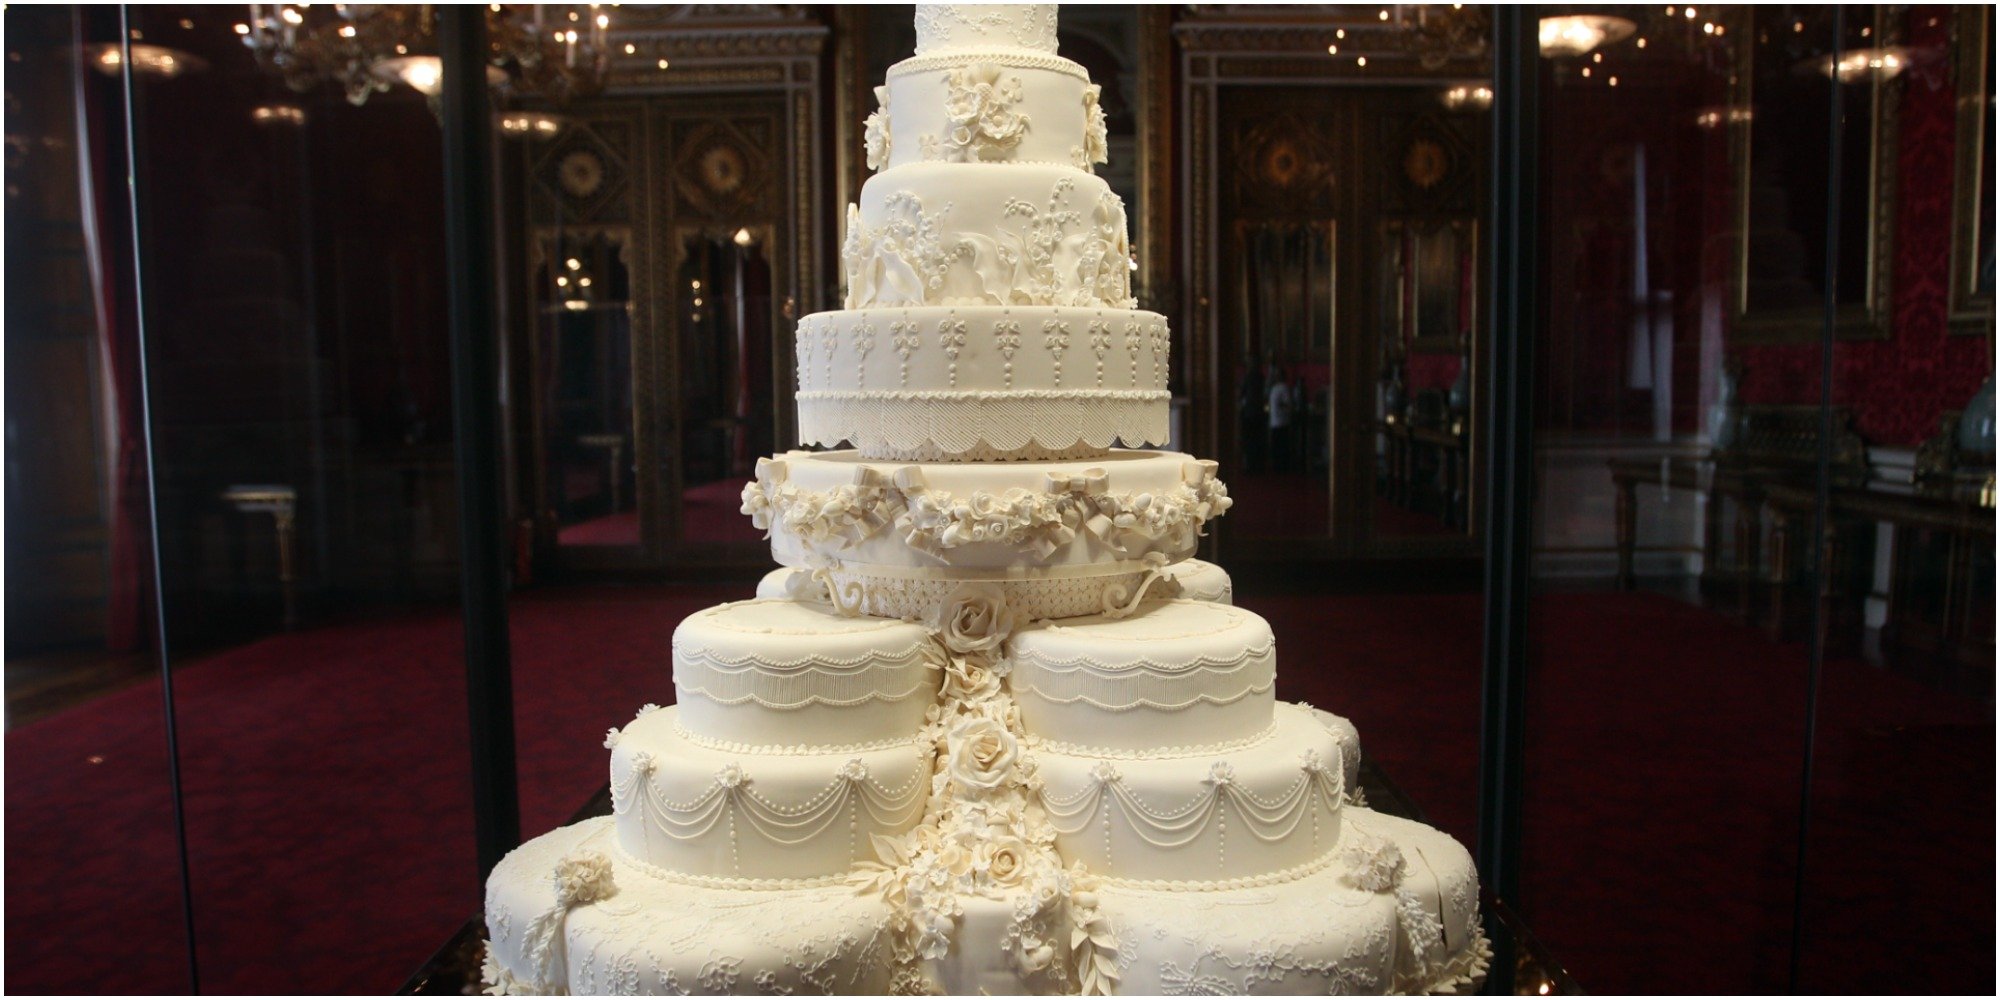 Prince William and Kate Middleton's wedding cake was a three foot tall confection made of fruitcake.